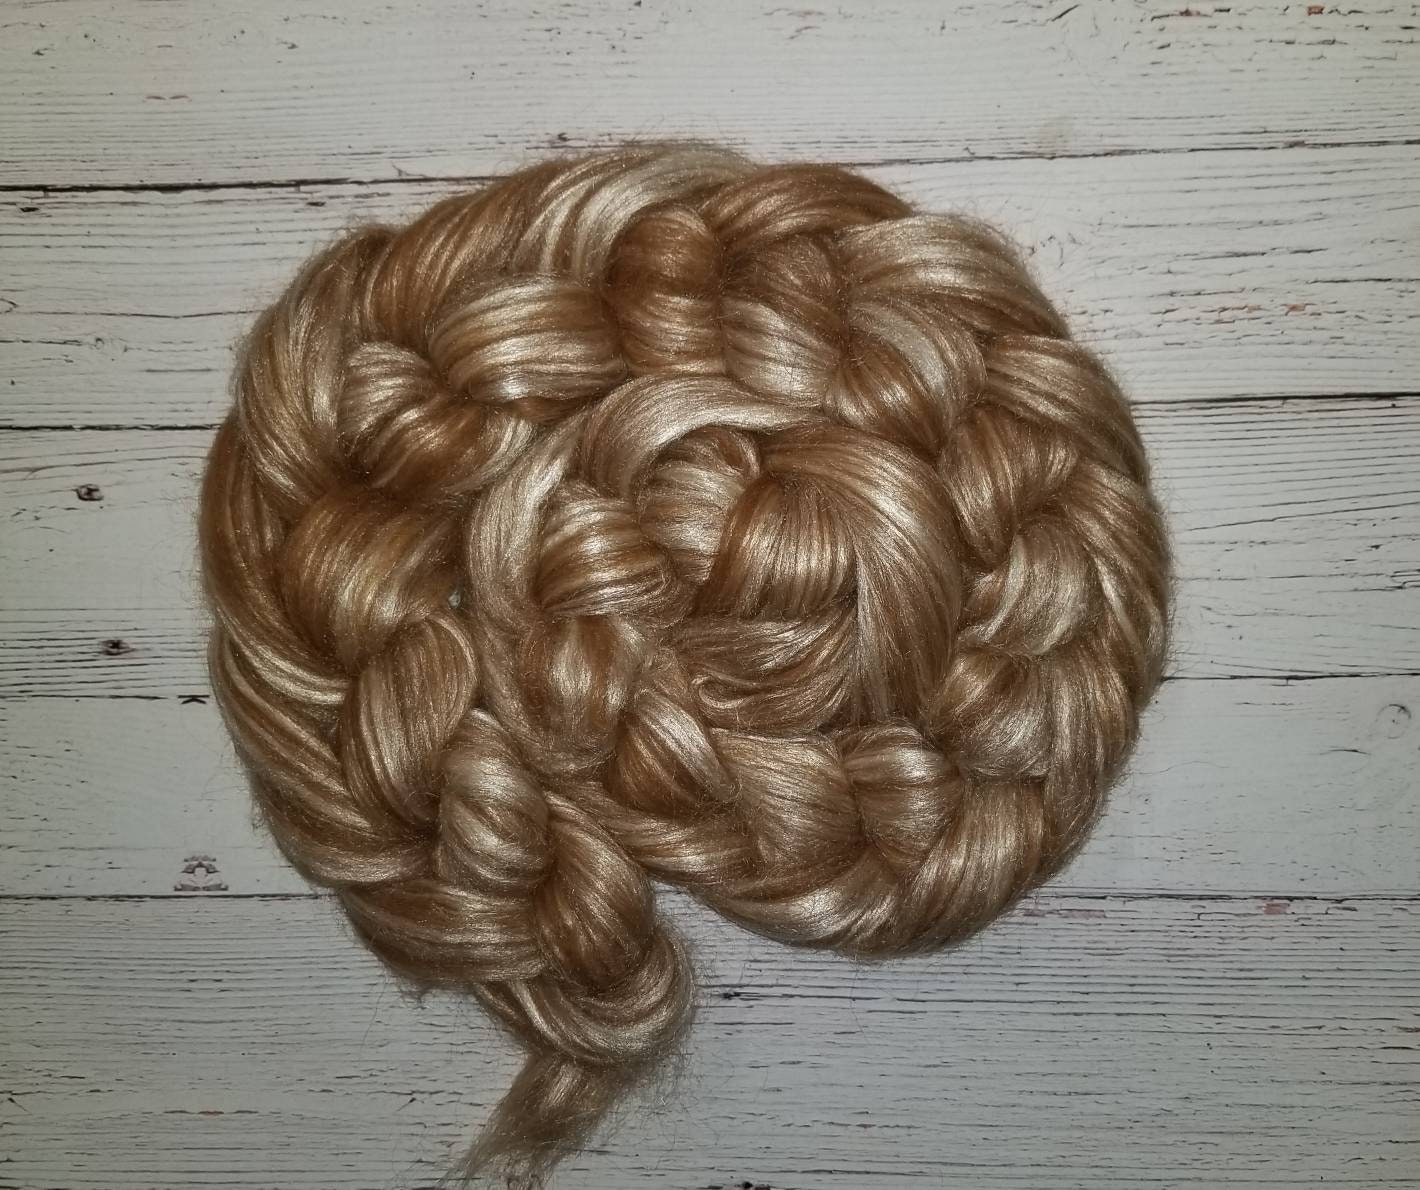 Baby Alpaca Tussah Silk 50 Blend 100G - Light Brown Combed Top For Spinning & Felting Silver Roving Sliver Fibre Fiber Luxury Fawn